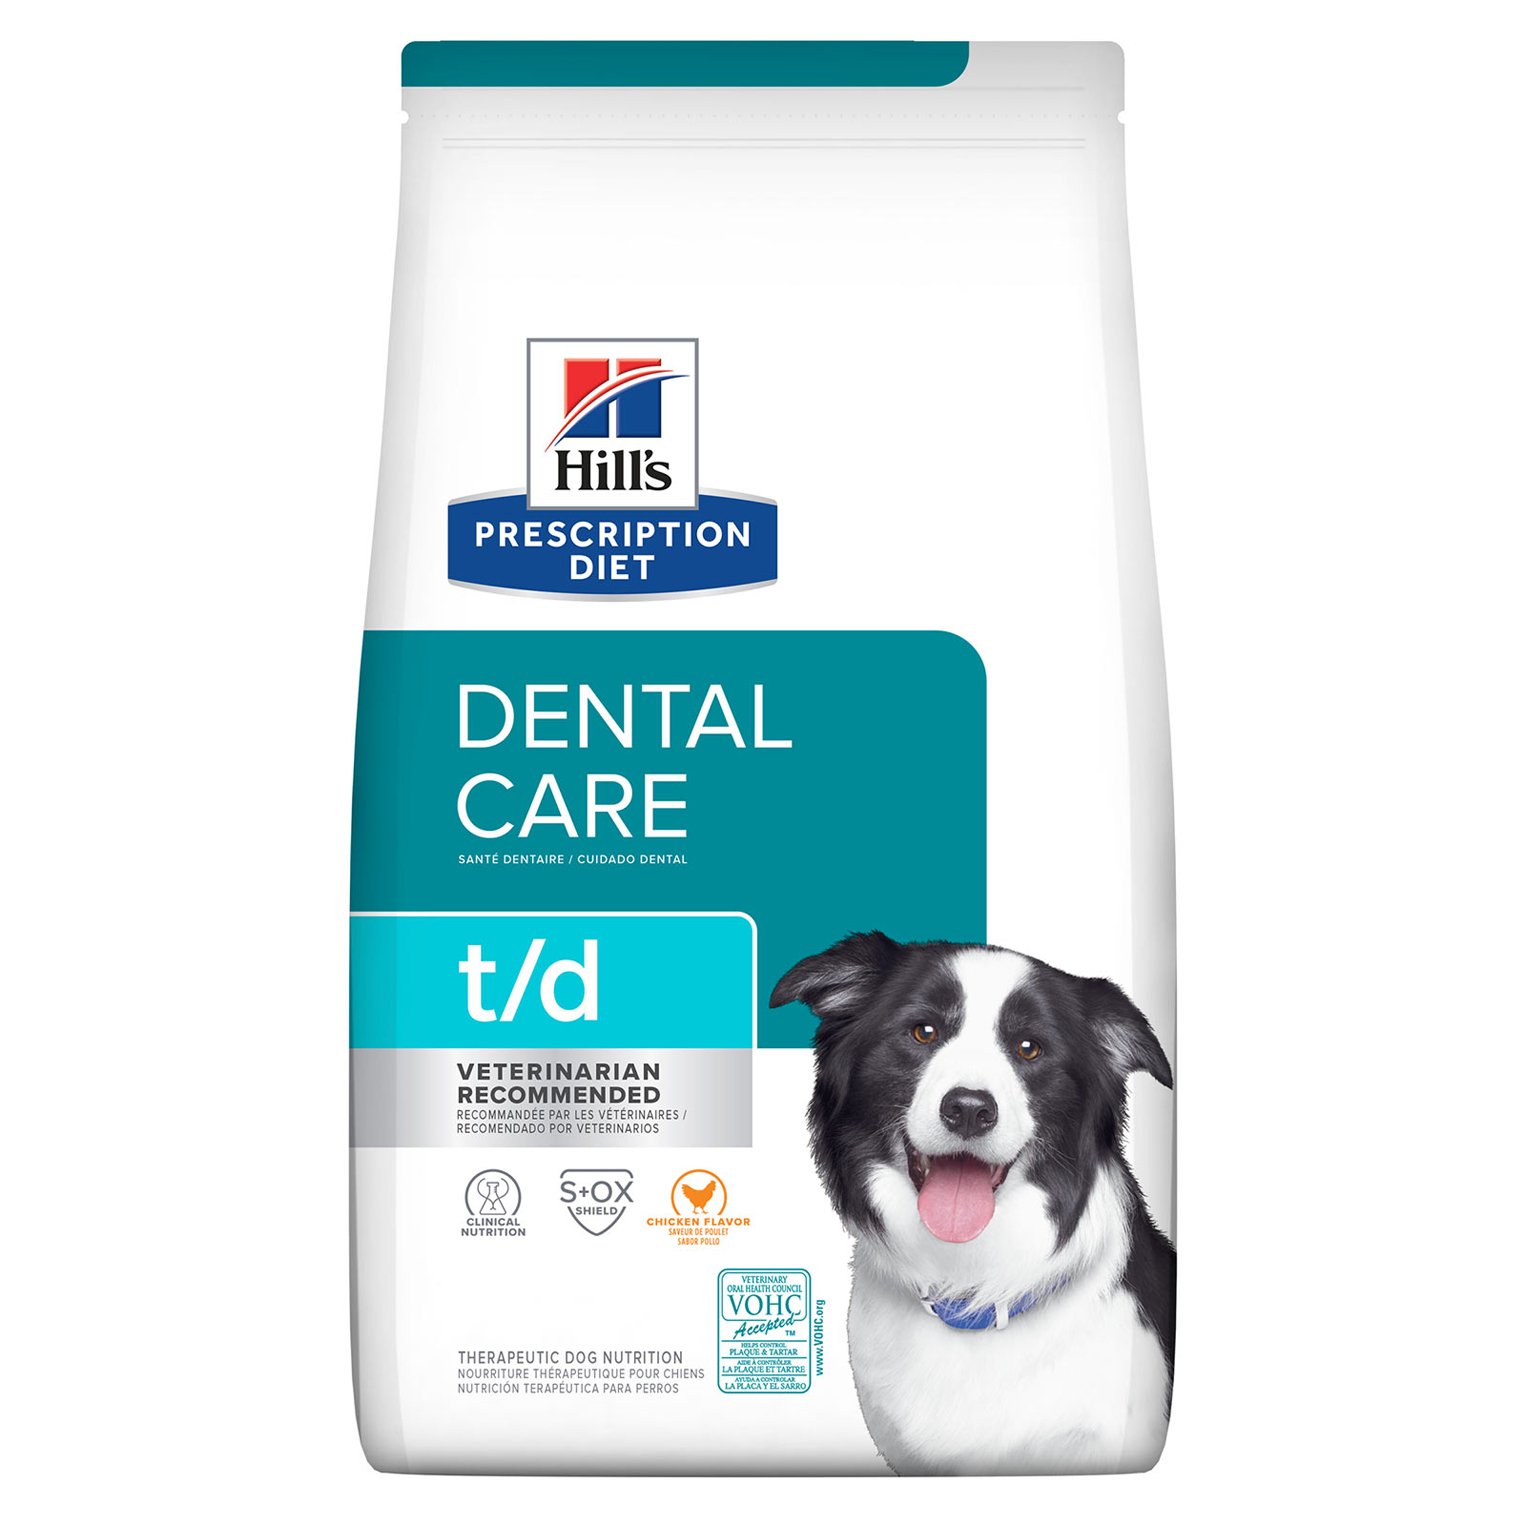 Hill's Prescription Diet t/d Dental Care with Chicken Dry Dog Food